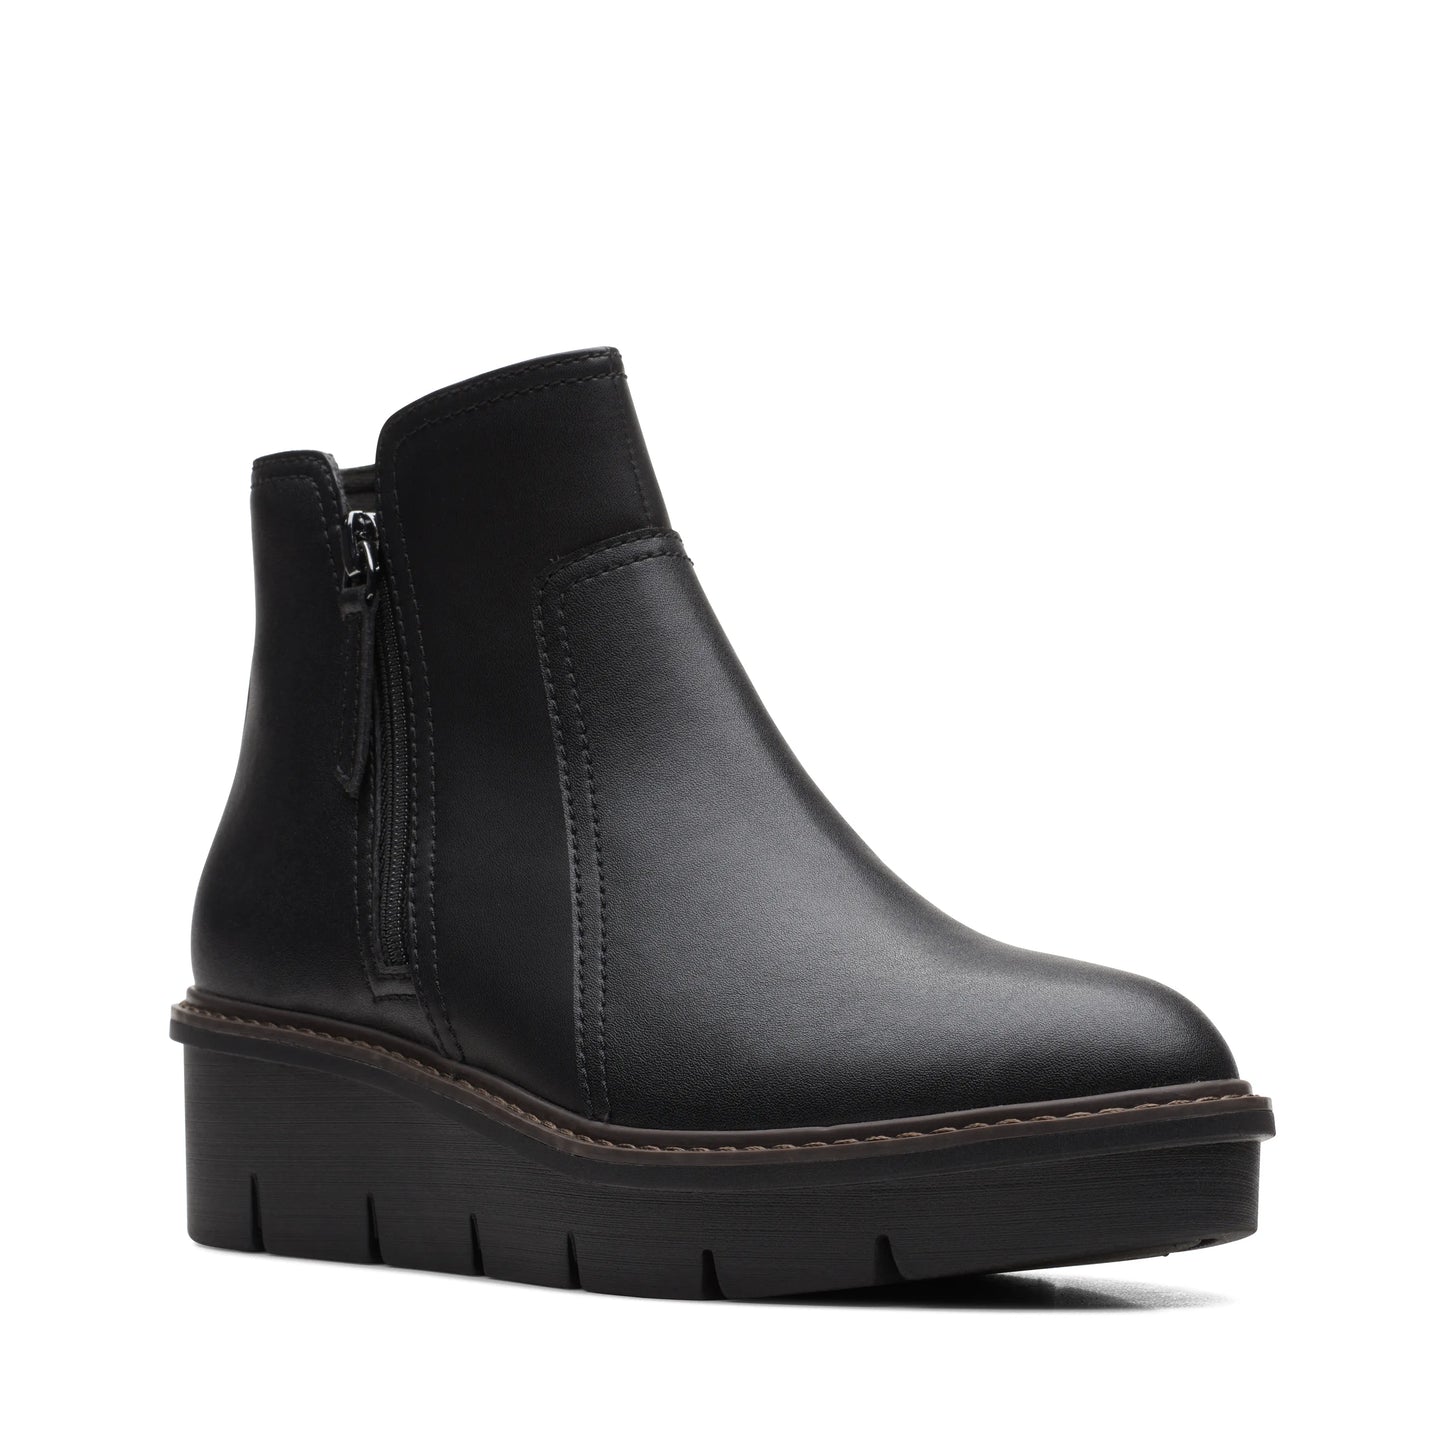 CLARKS | BOTAS MUJER | AIRABELL ZIP BLACK SMOOTH | NEGRO